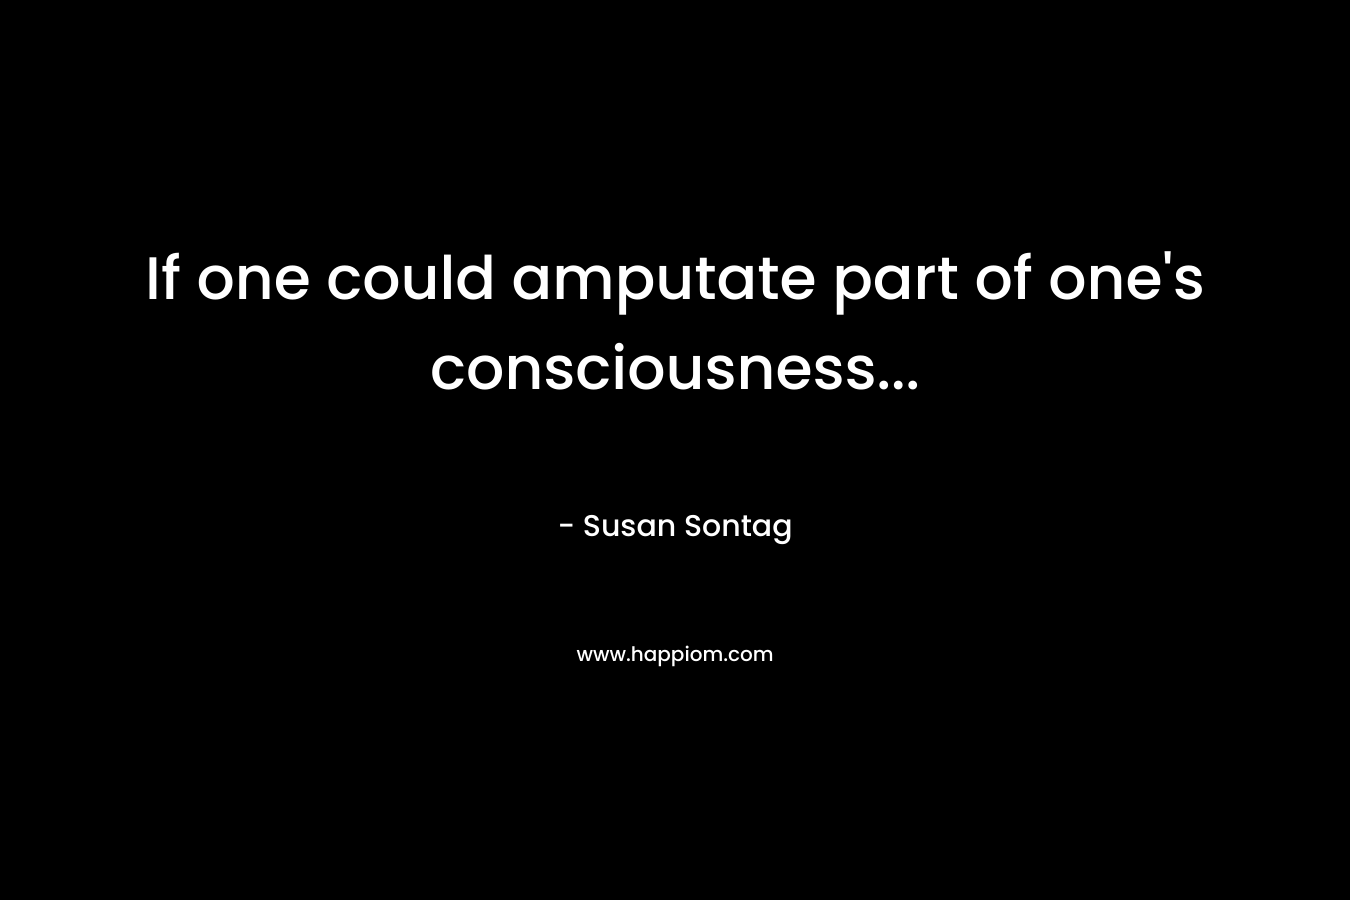 If one could amputate part of one's consciousness...